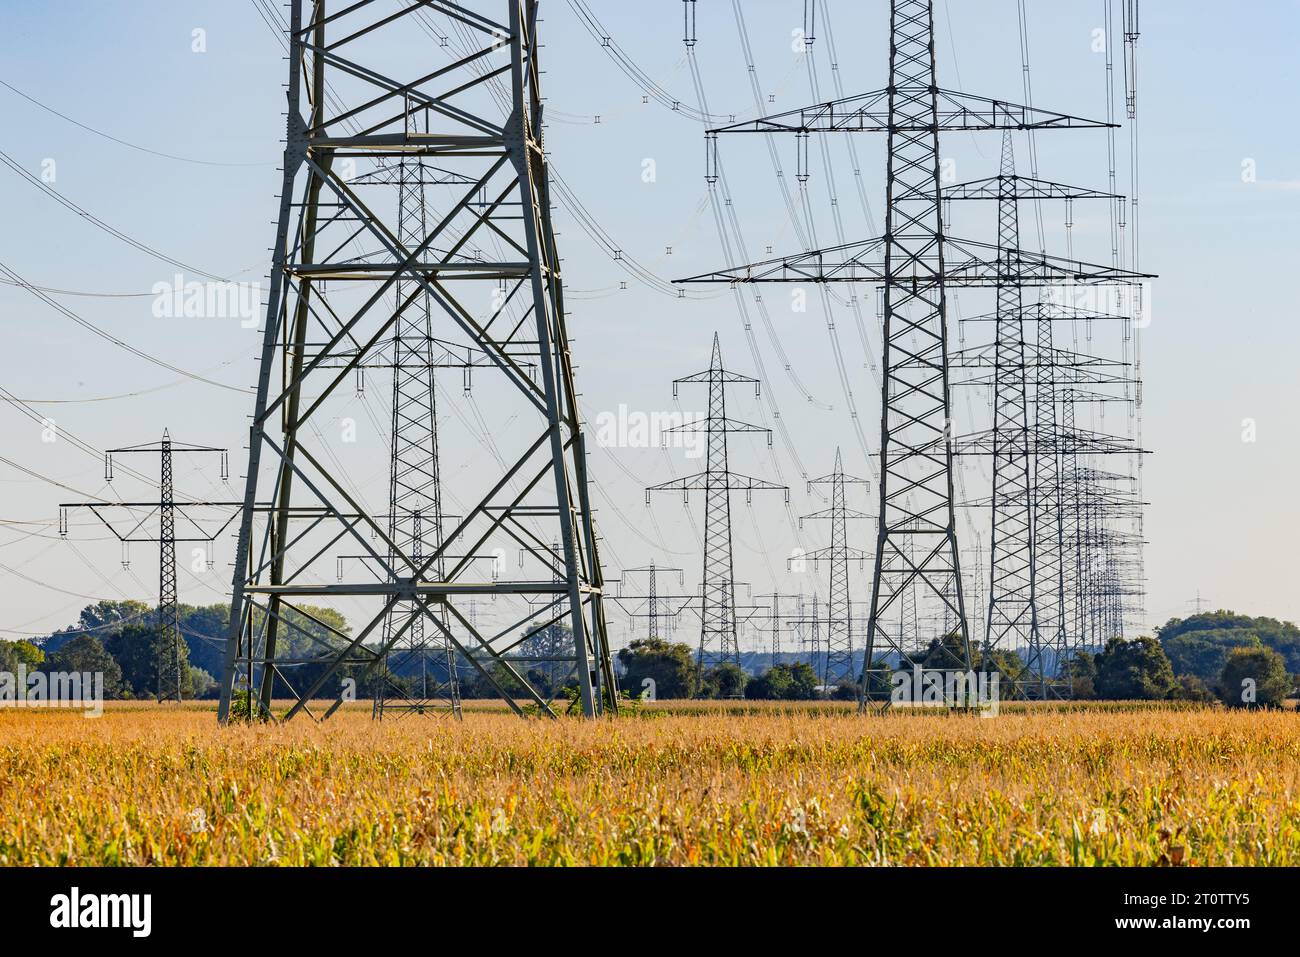 An agricultural field with corn with many high voltage pylons and overhead power lines in rural area, Germany in energy transition Stock Photo